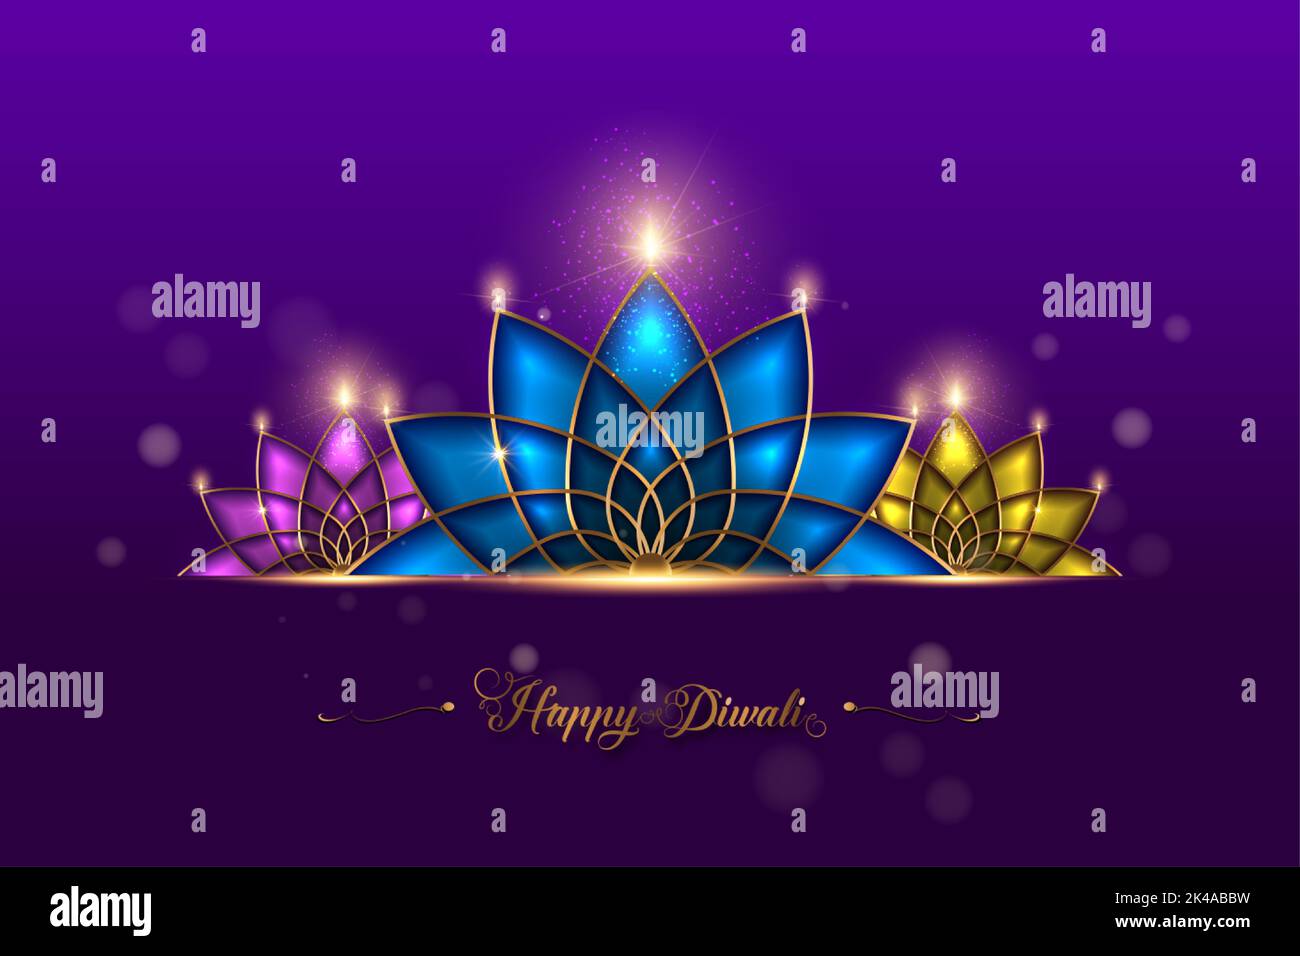 Happy Diwali Festival of Lights India Celebration colorful template. Graphic banner design of Indian Lotus Diya Oil Lamps, Modern Design Stock Vector